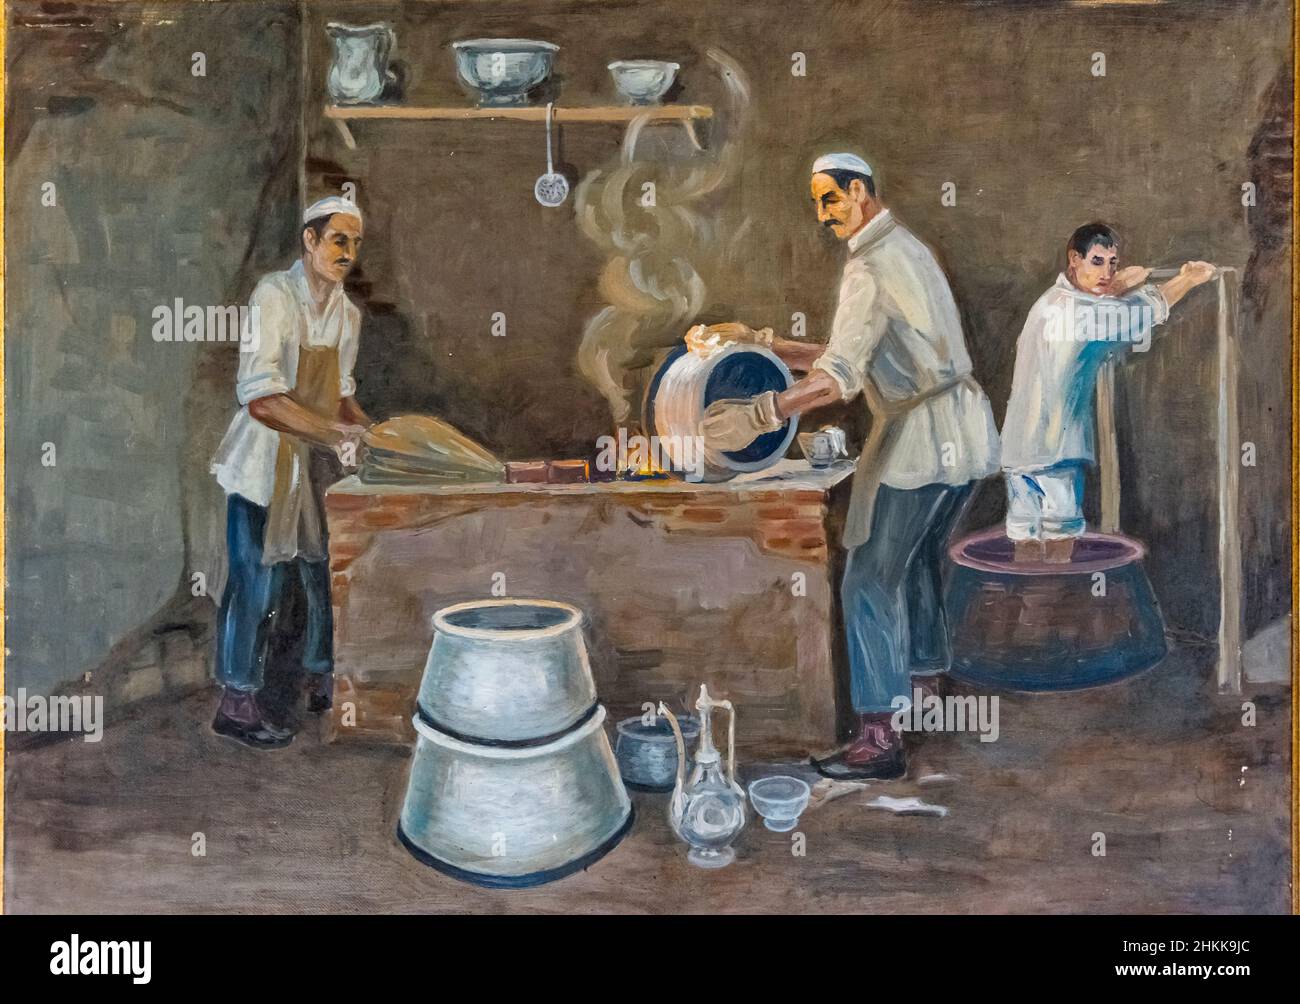 Painting depicting people's life in Ethnography Museum, Nakhchivan, Nakhchivan Autonomous Republic, an exclave of Azerbaijan Stock Photo